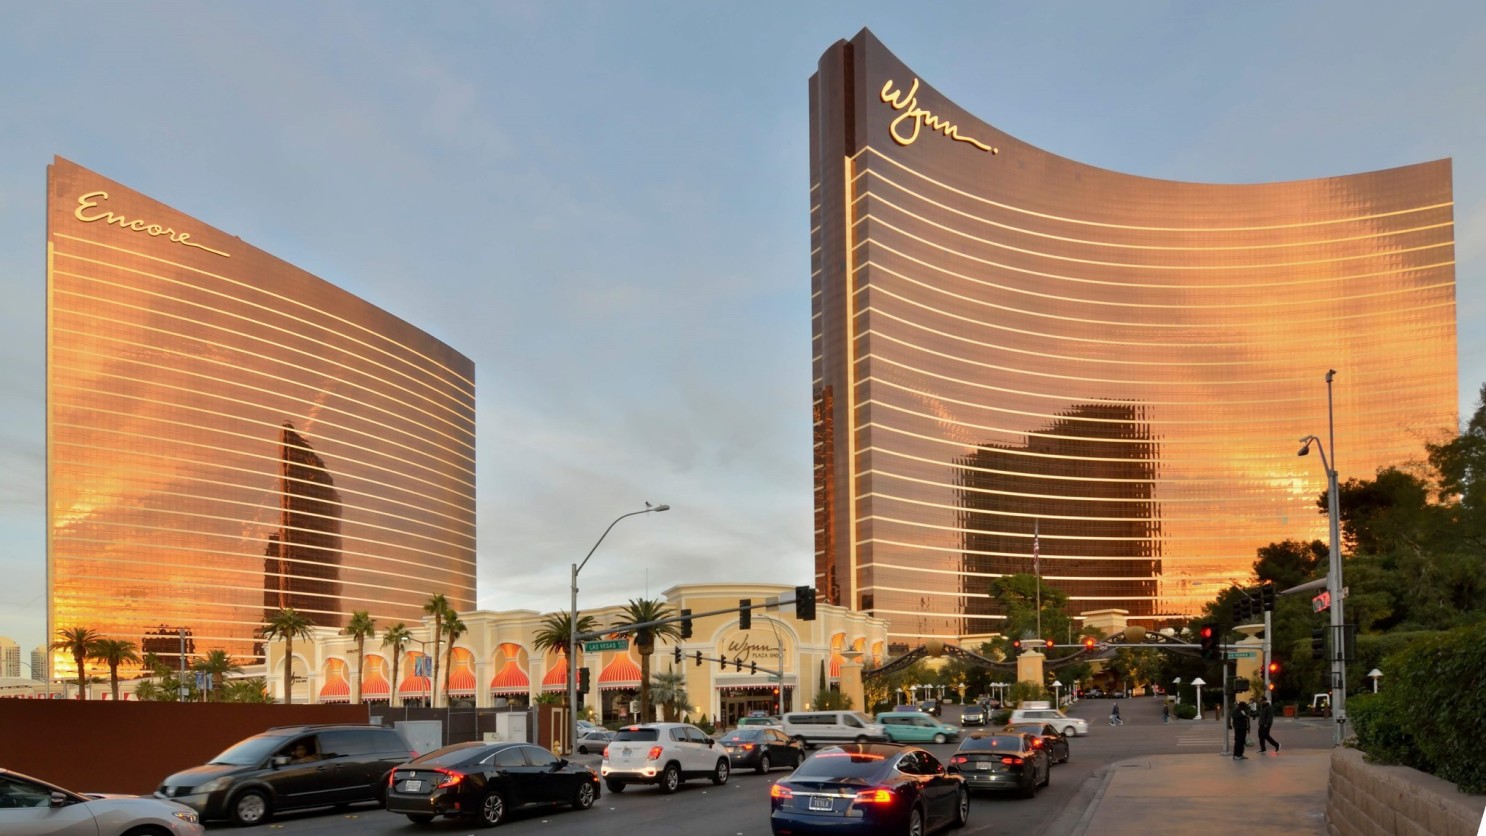 encore casino hours of operation